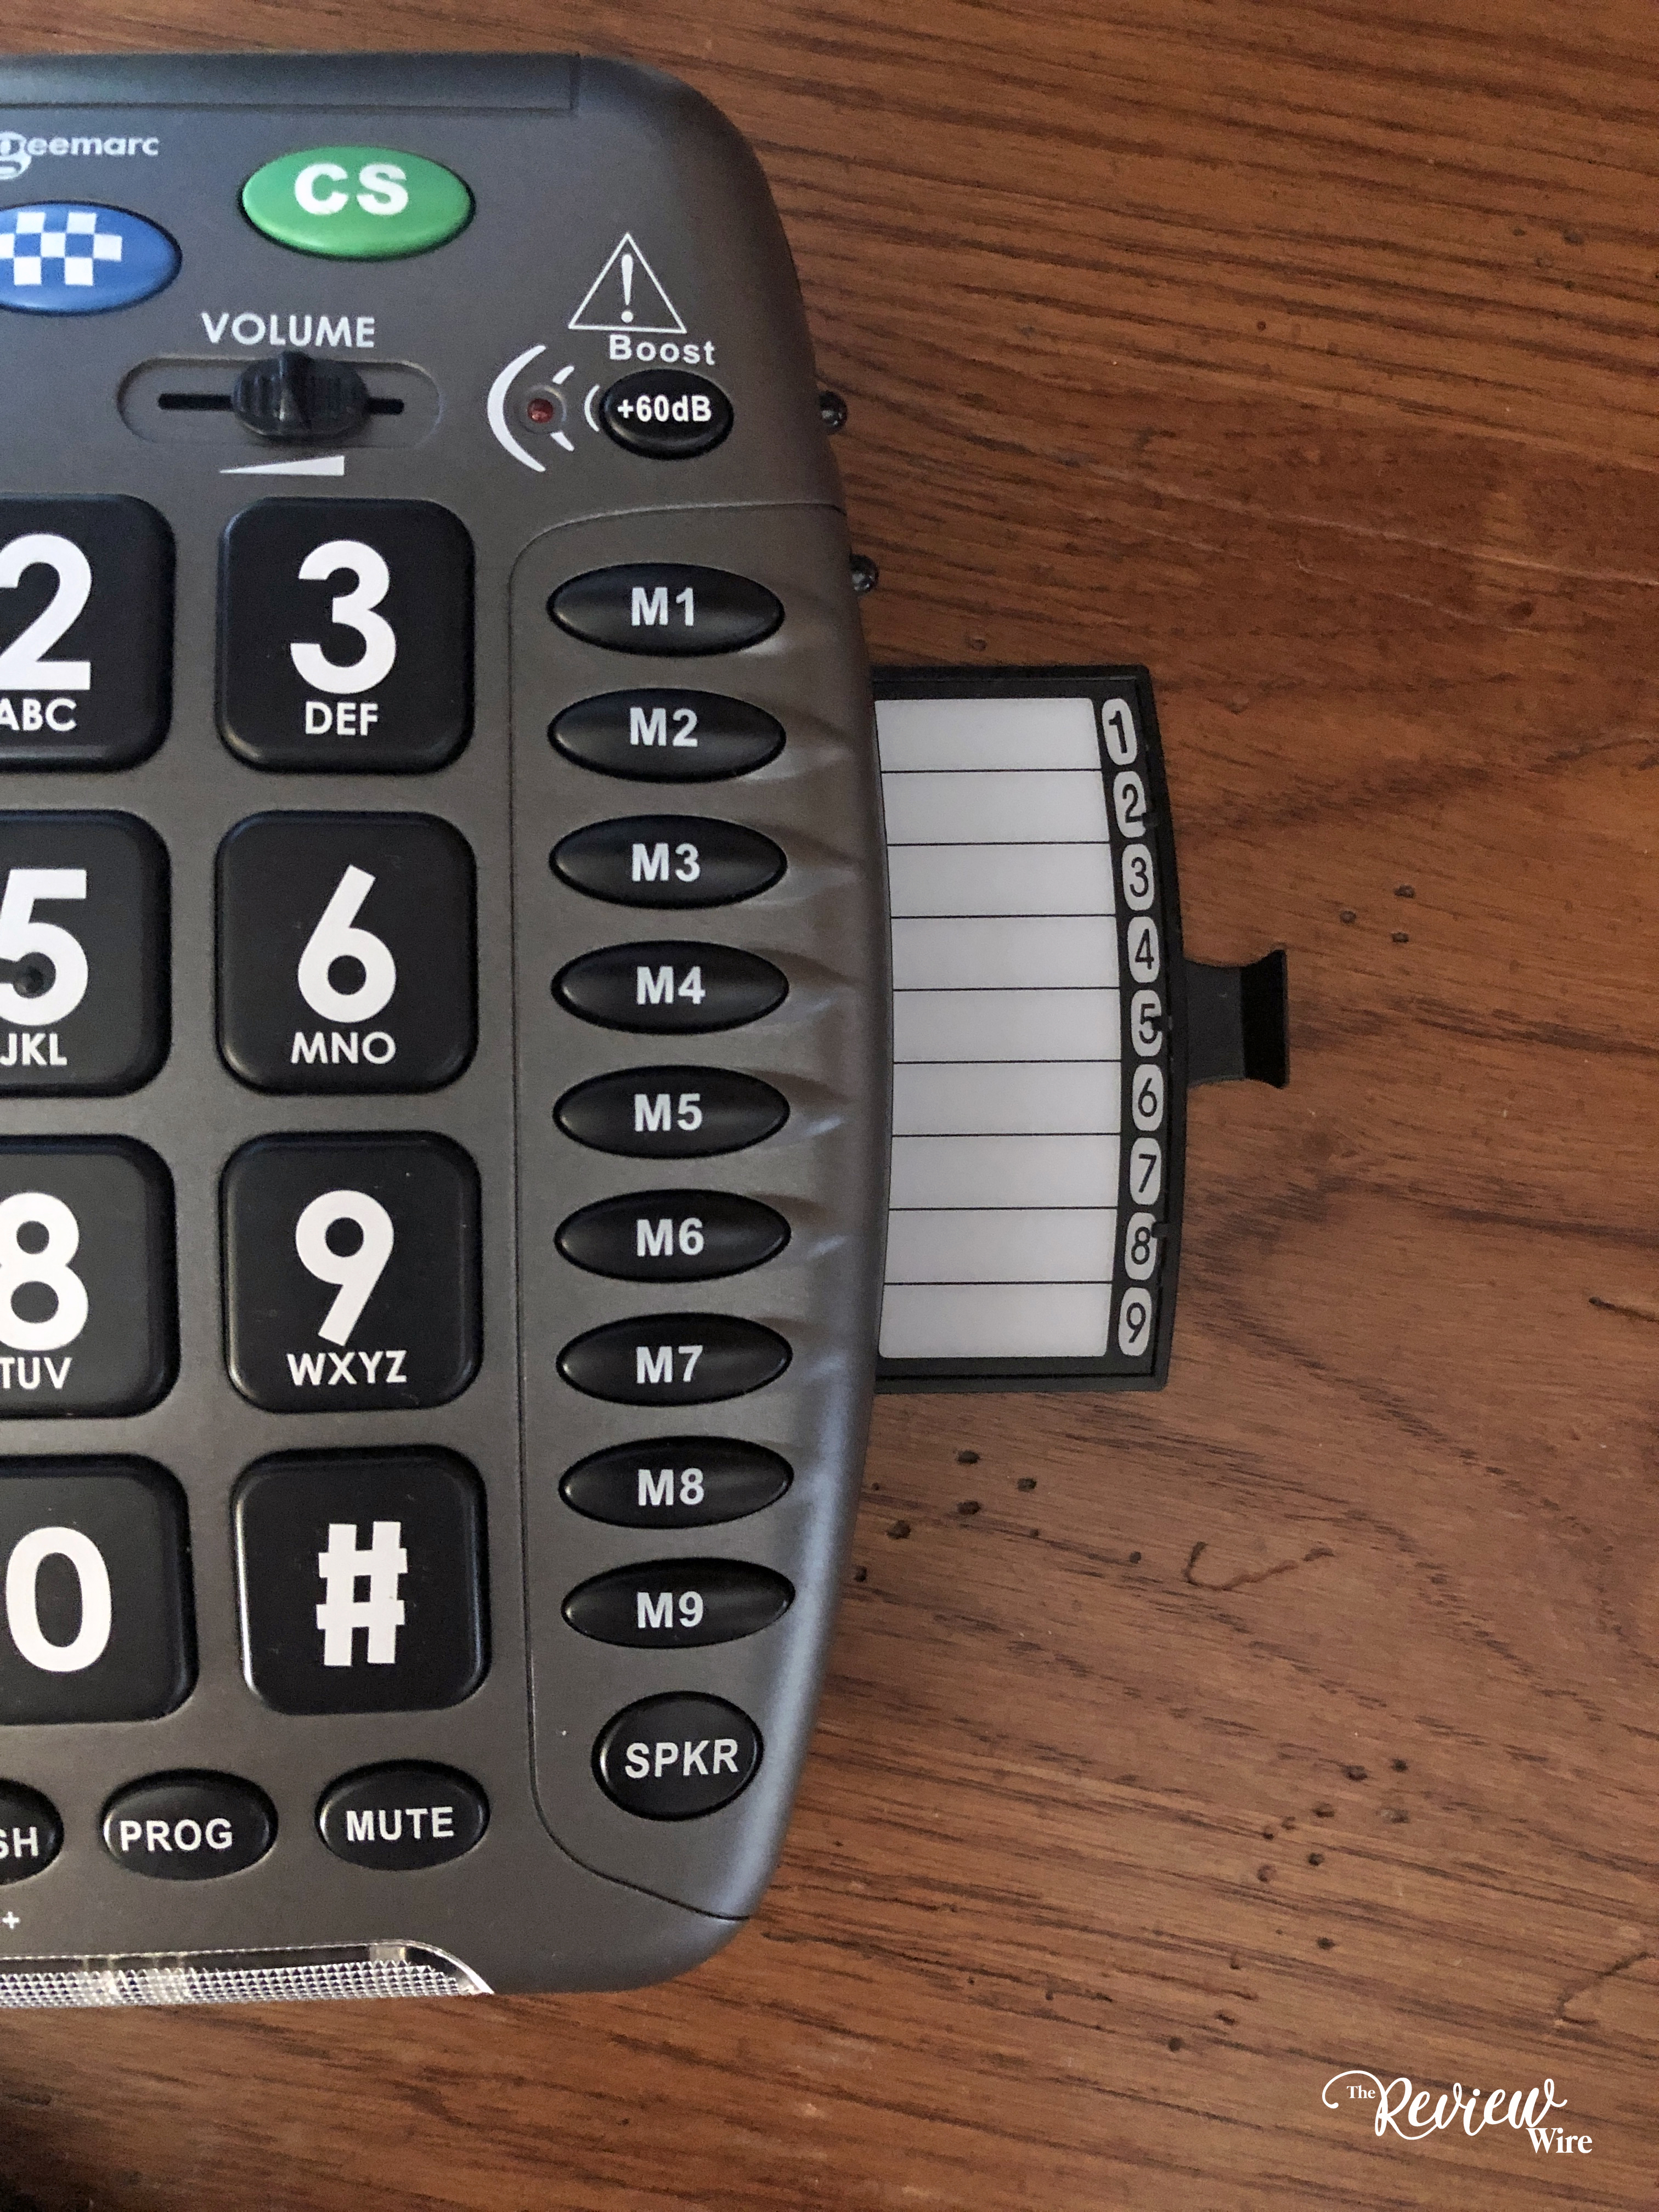 The Review Wire: AmpilPower 60+ Phone Memory Buttons